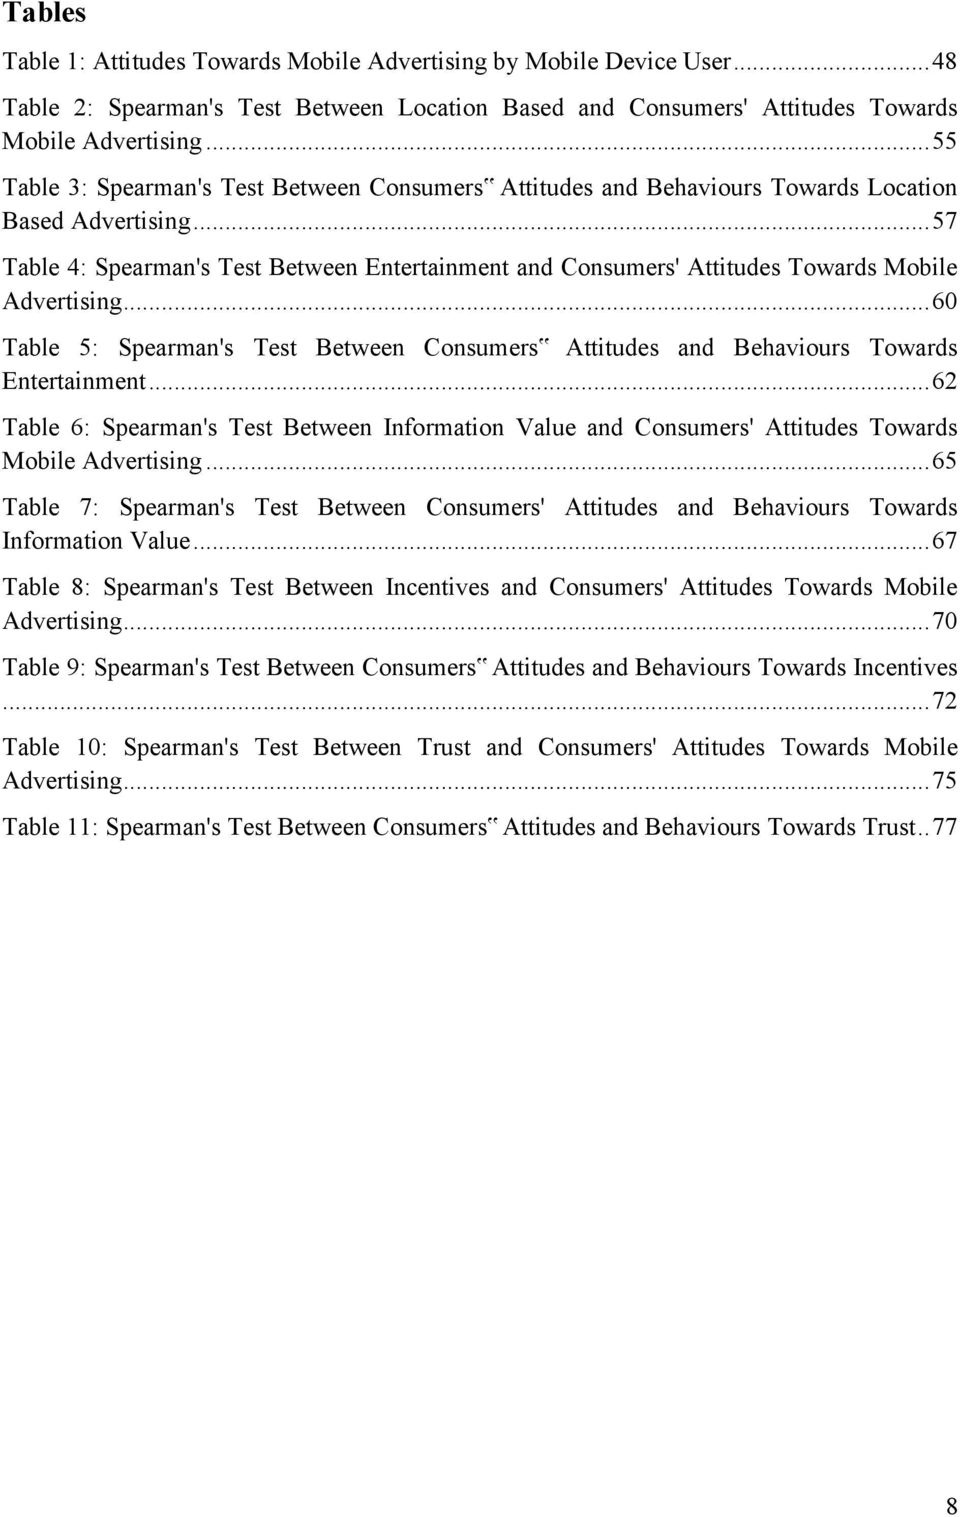 .. 57 Table 4: Spearman's Test Between Entertainment and Consumers' Attitudes Towards Mobile Advertising... 60 Table 5: Spearman's Test Between Consumers Attitudes and Behaviours Towards Entertainment.